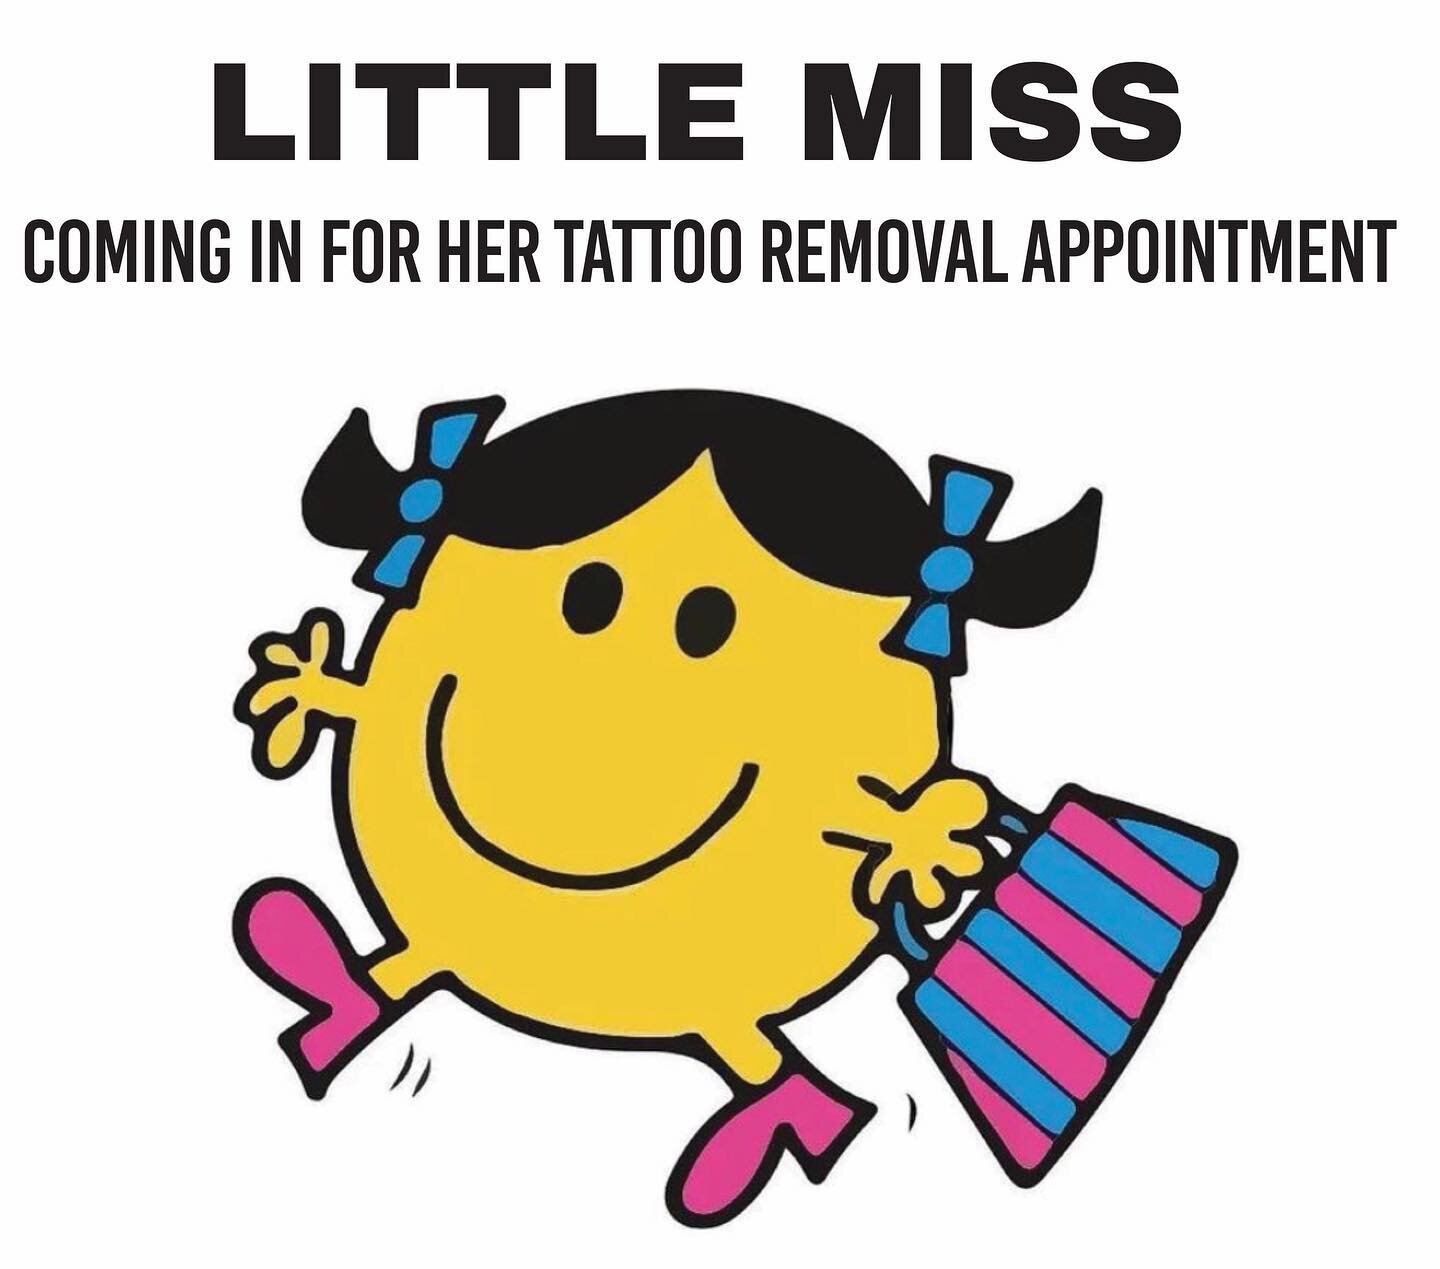 Little Miss is at it again #tattooremoval #tattootuesday #littlemiss